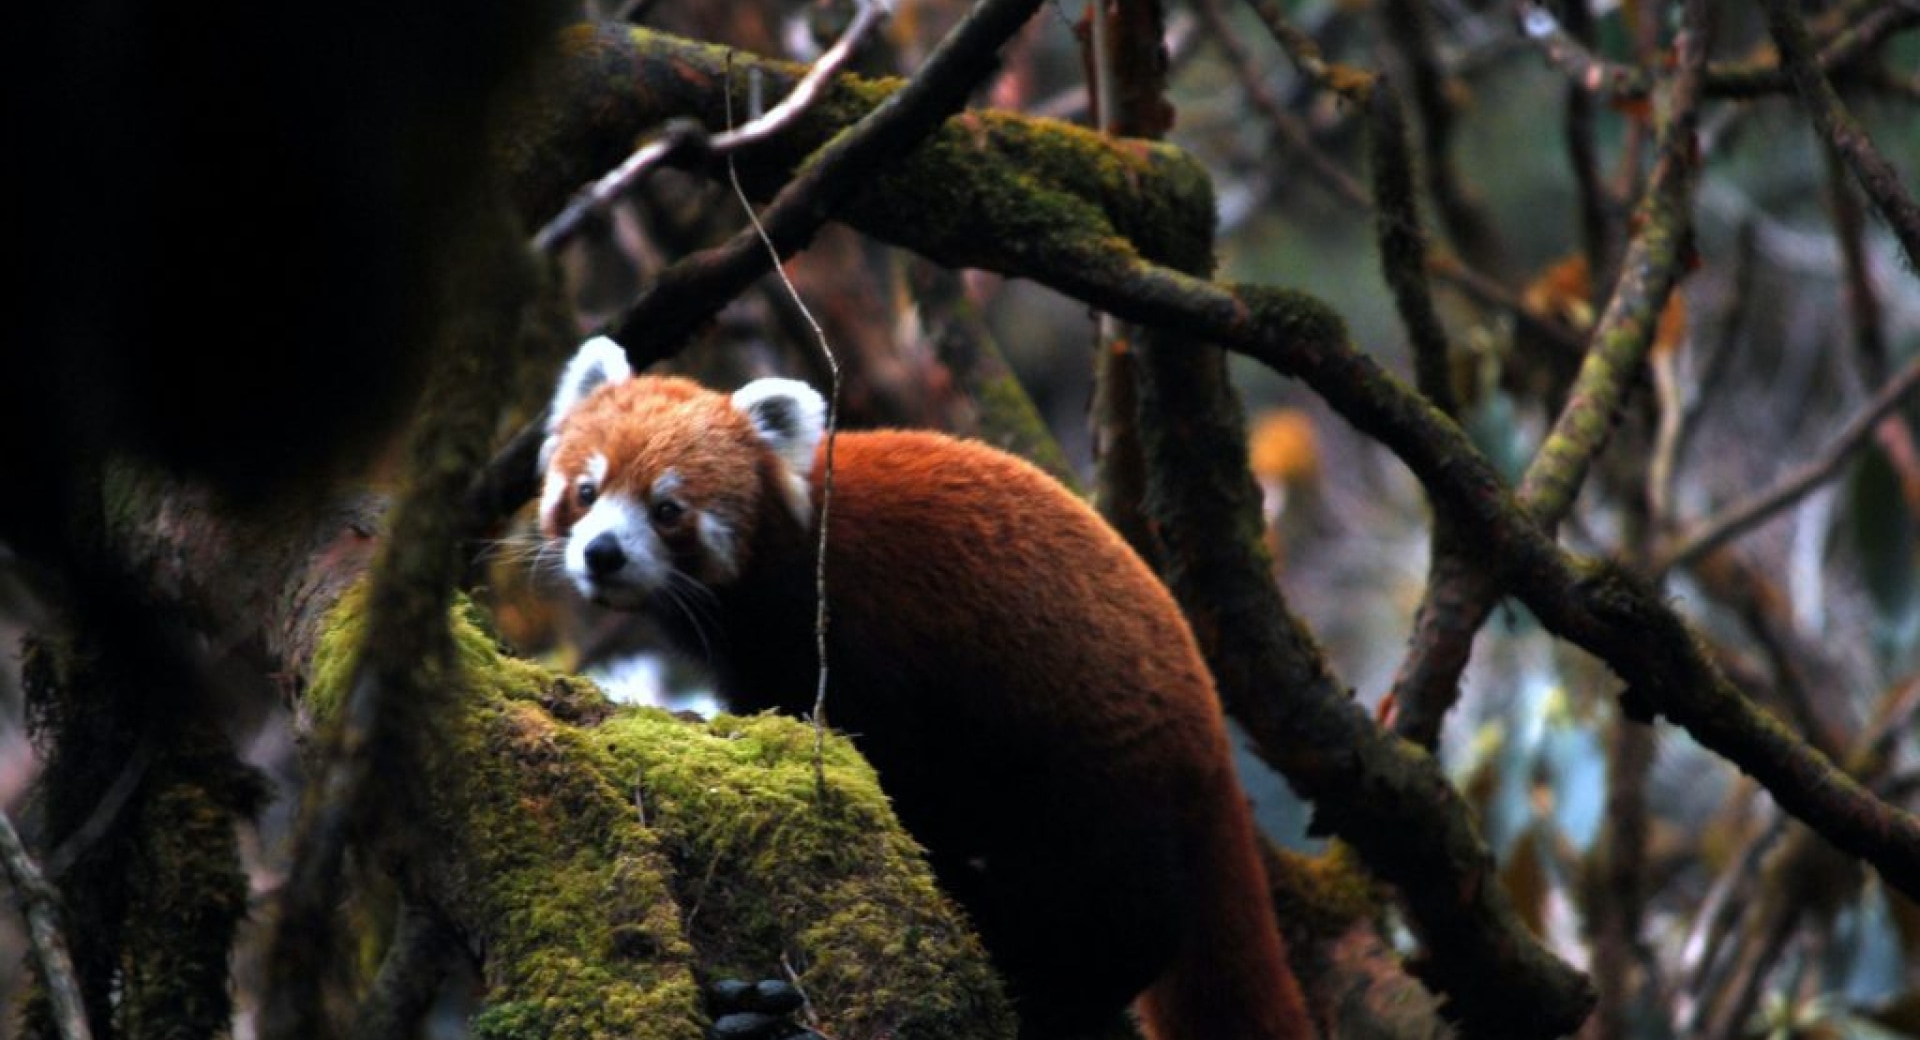 Red Panda Network Nepal Team Rolls Out 4th Annual International Red Panda Day with the slogan “There is no excuse for red panda abuse”